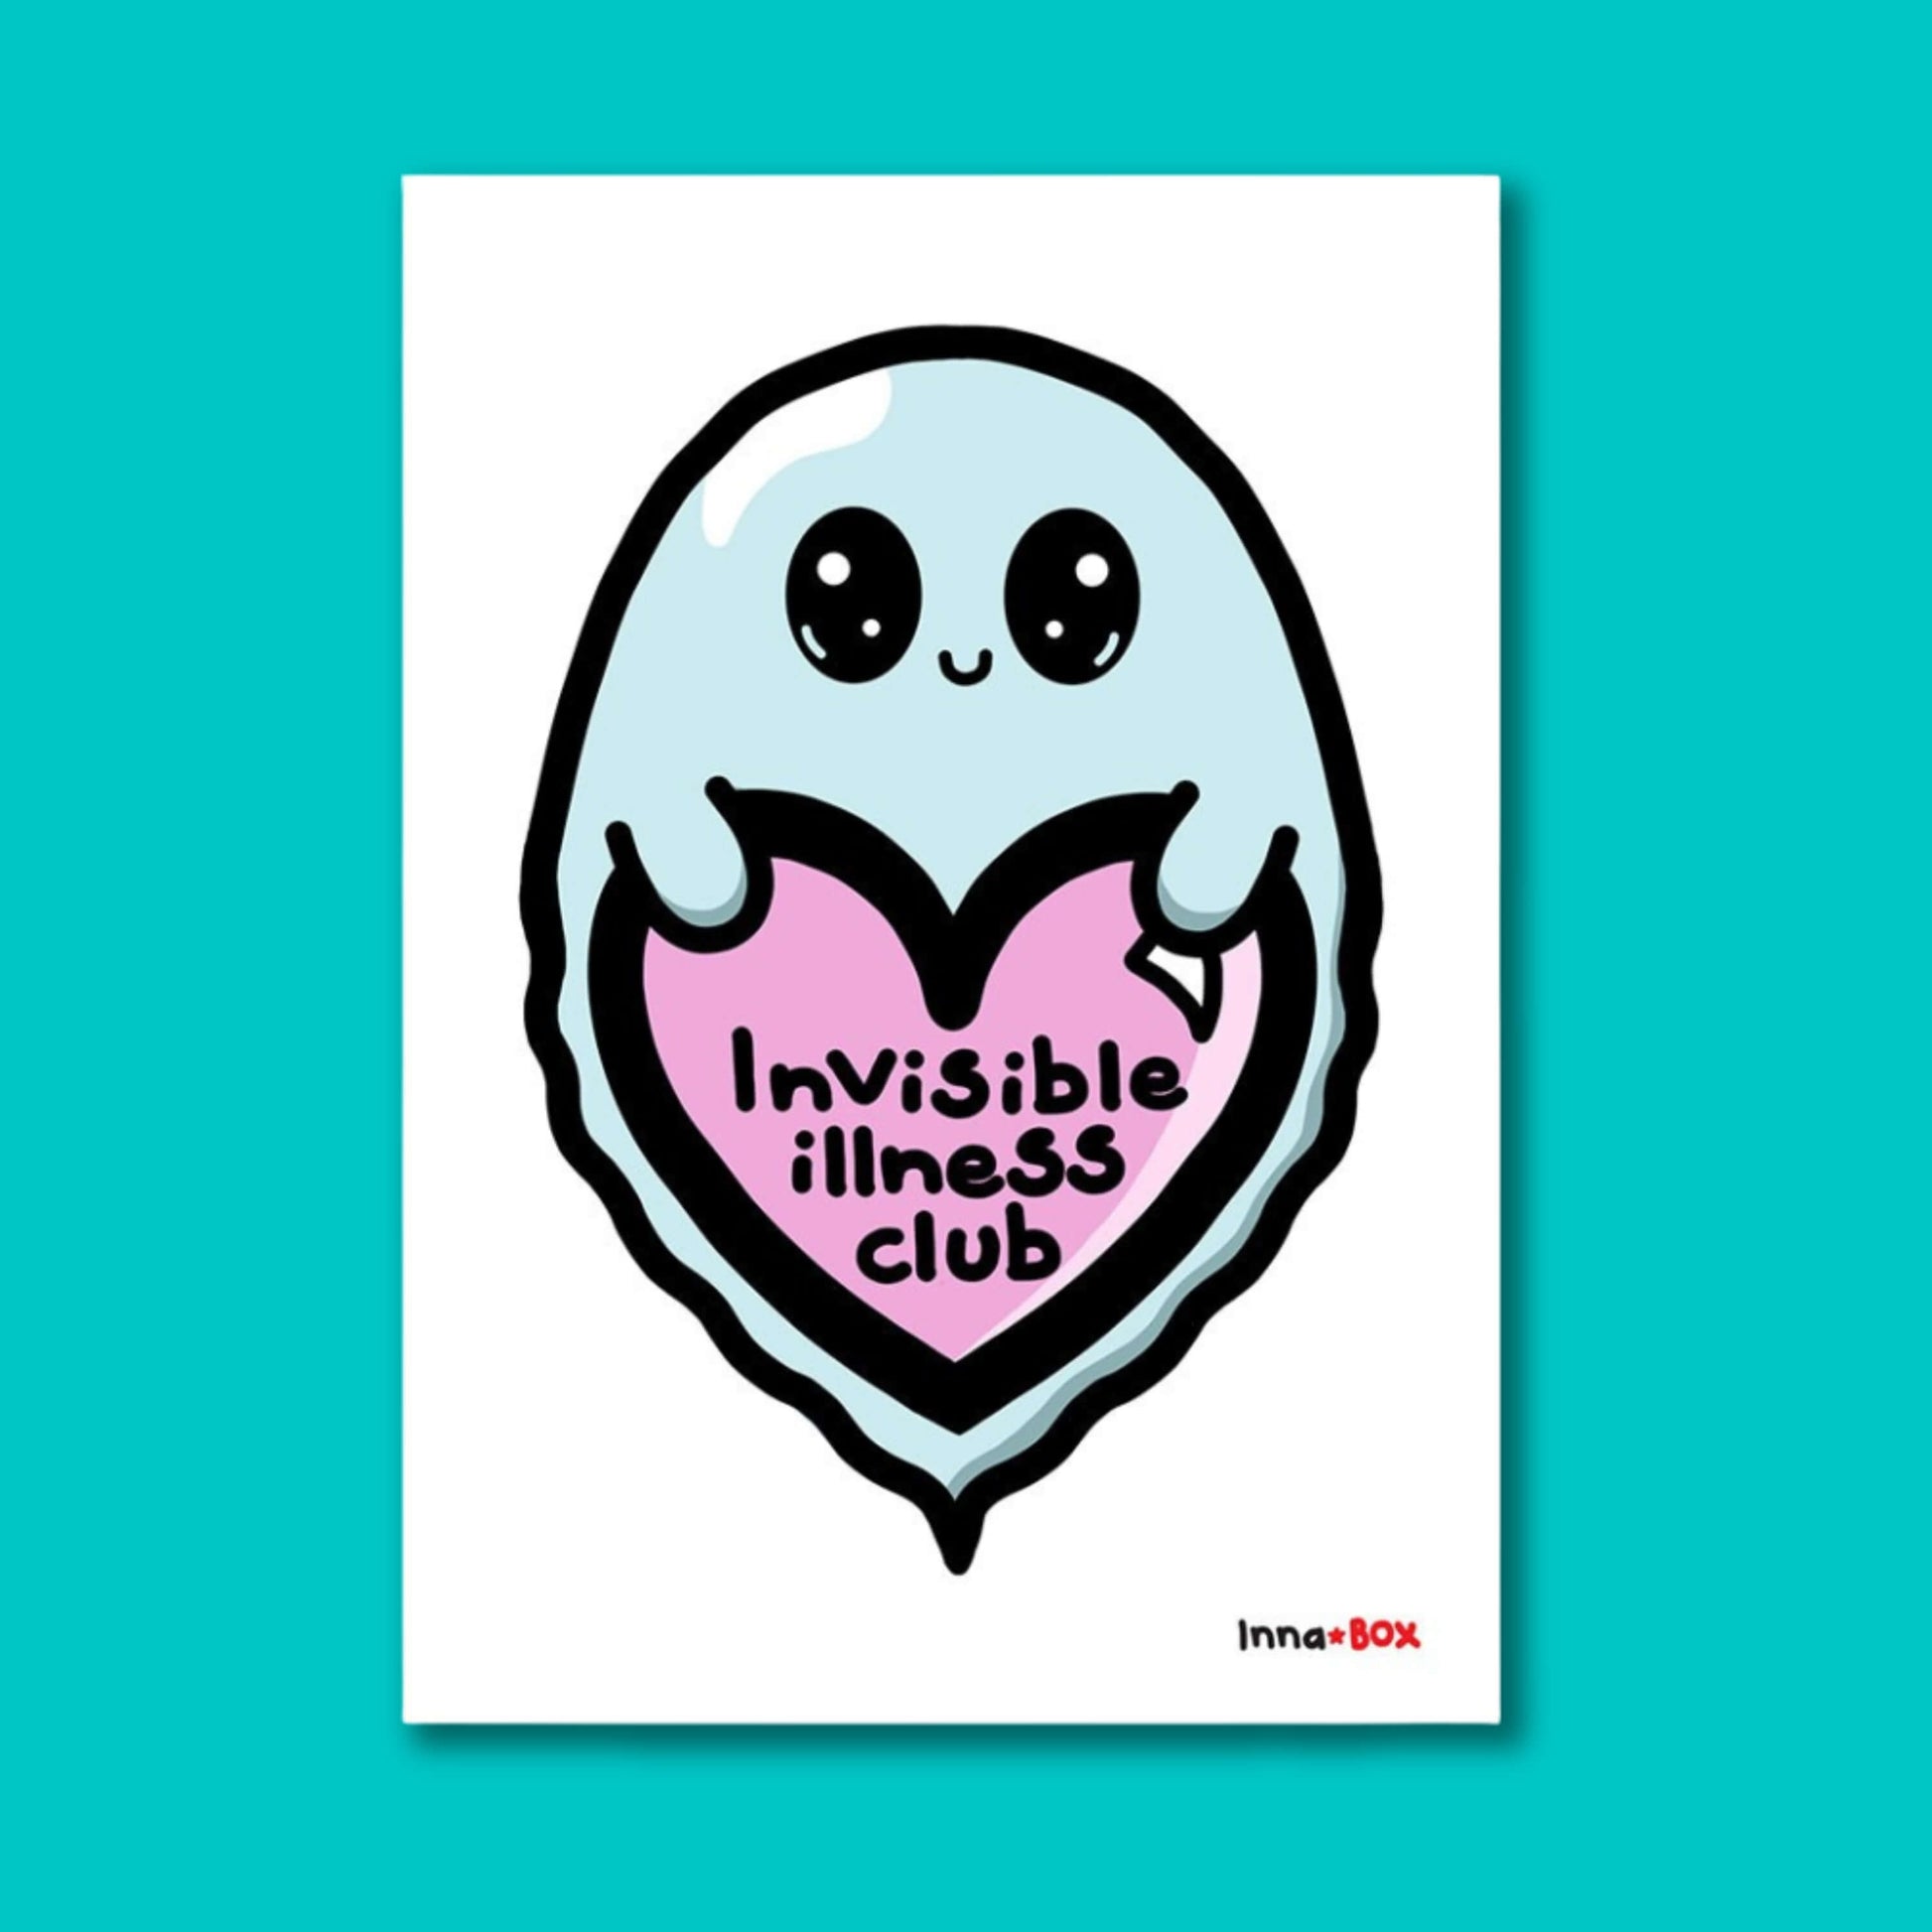 The Invisible Illness Club Postcard on a blue background. The white postcard print features a pastel blue smiling ghost with big sparkly eyes holding up a pink heart with black text reading 'invisible illness club' with the innabox logo in the bottom right corner. The hand drawn design is raising awareness for hidden disabilities and chronic illness.